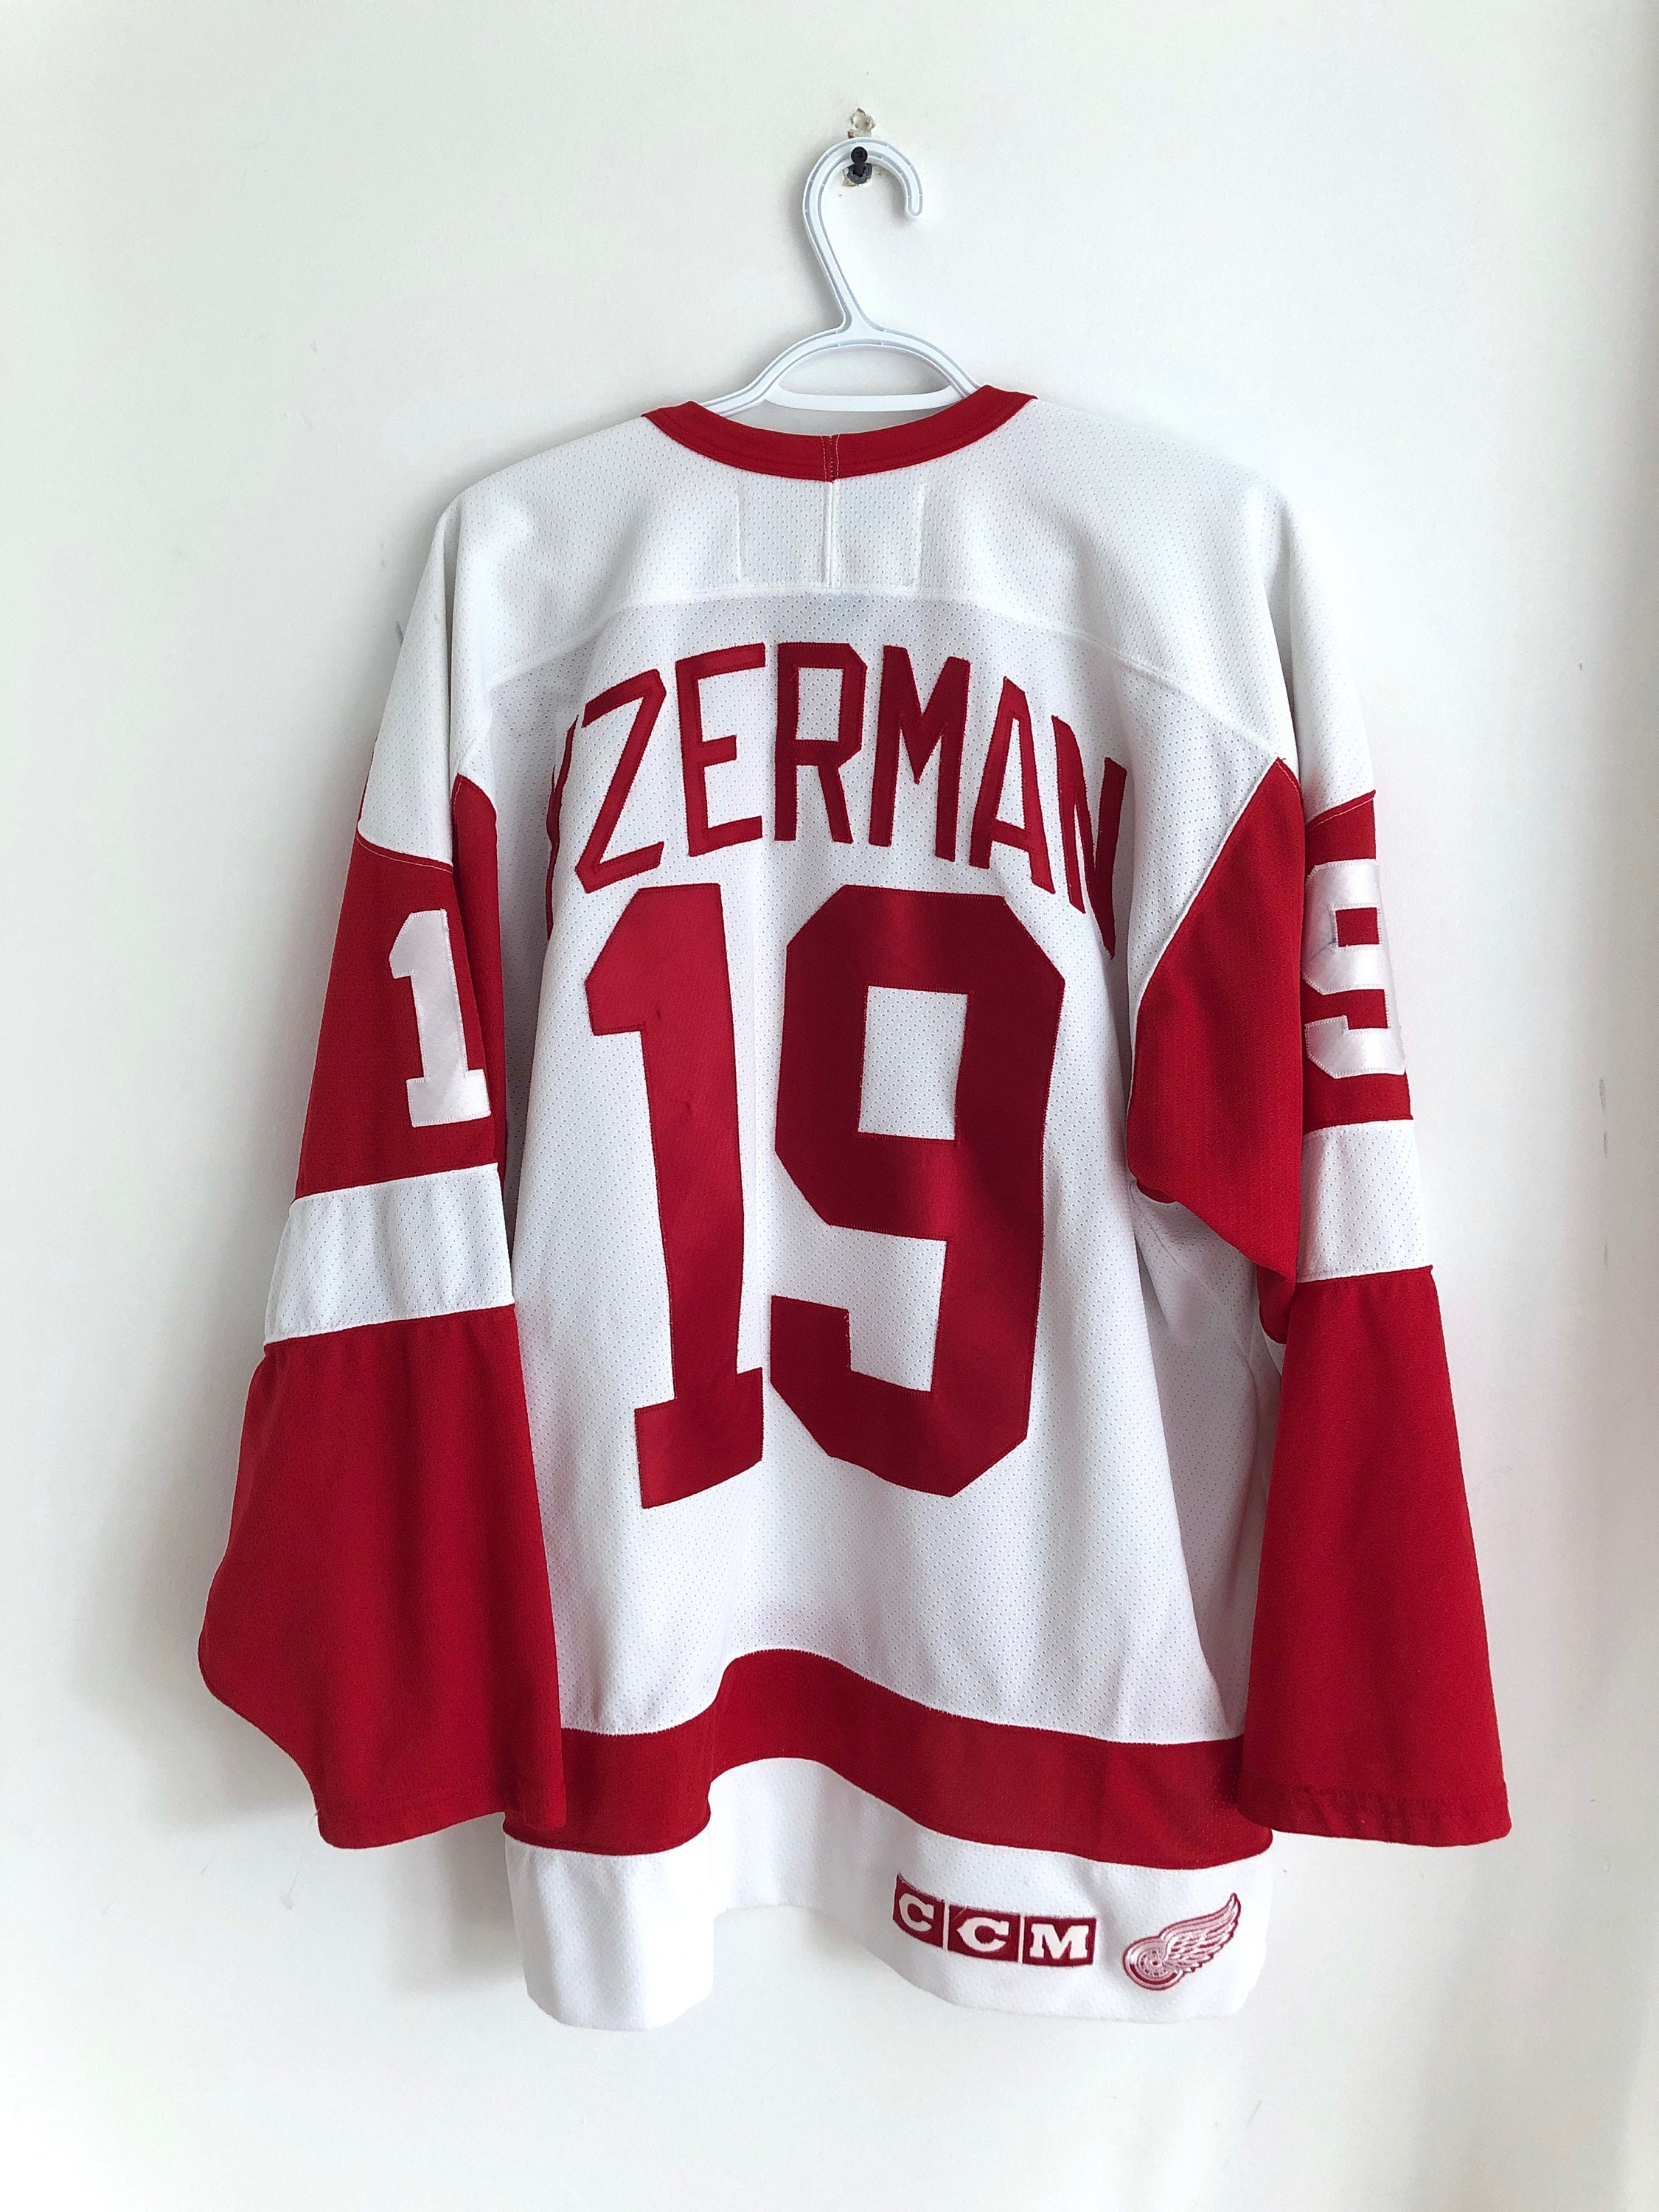 JerseyCreater 1986 Gordie Howe #9 Hockey Jerseys Red Movie Cameron Frye Jersey Red Stitched;Toddler/Youth/Adult;Custom Names